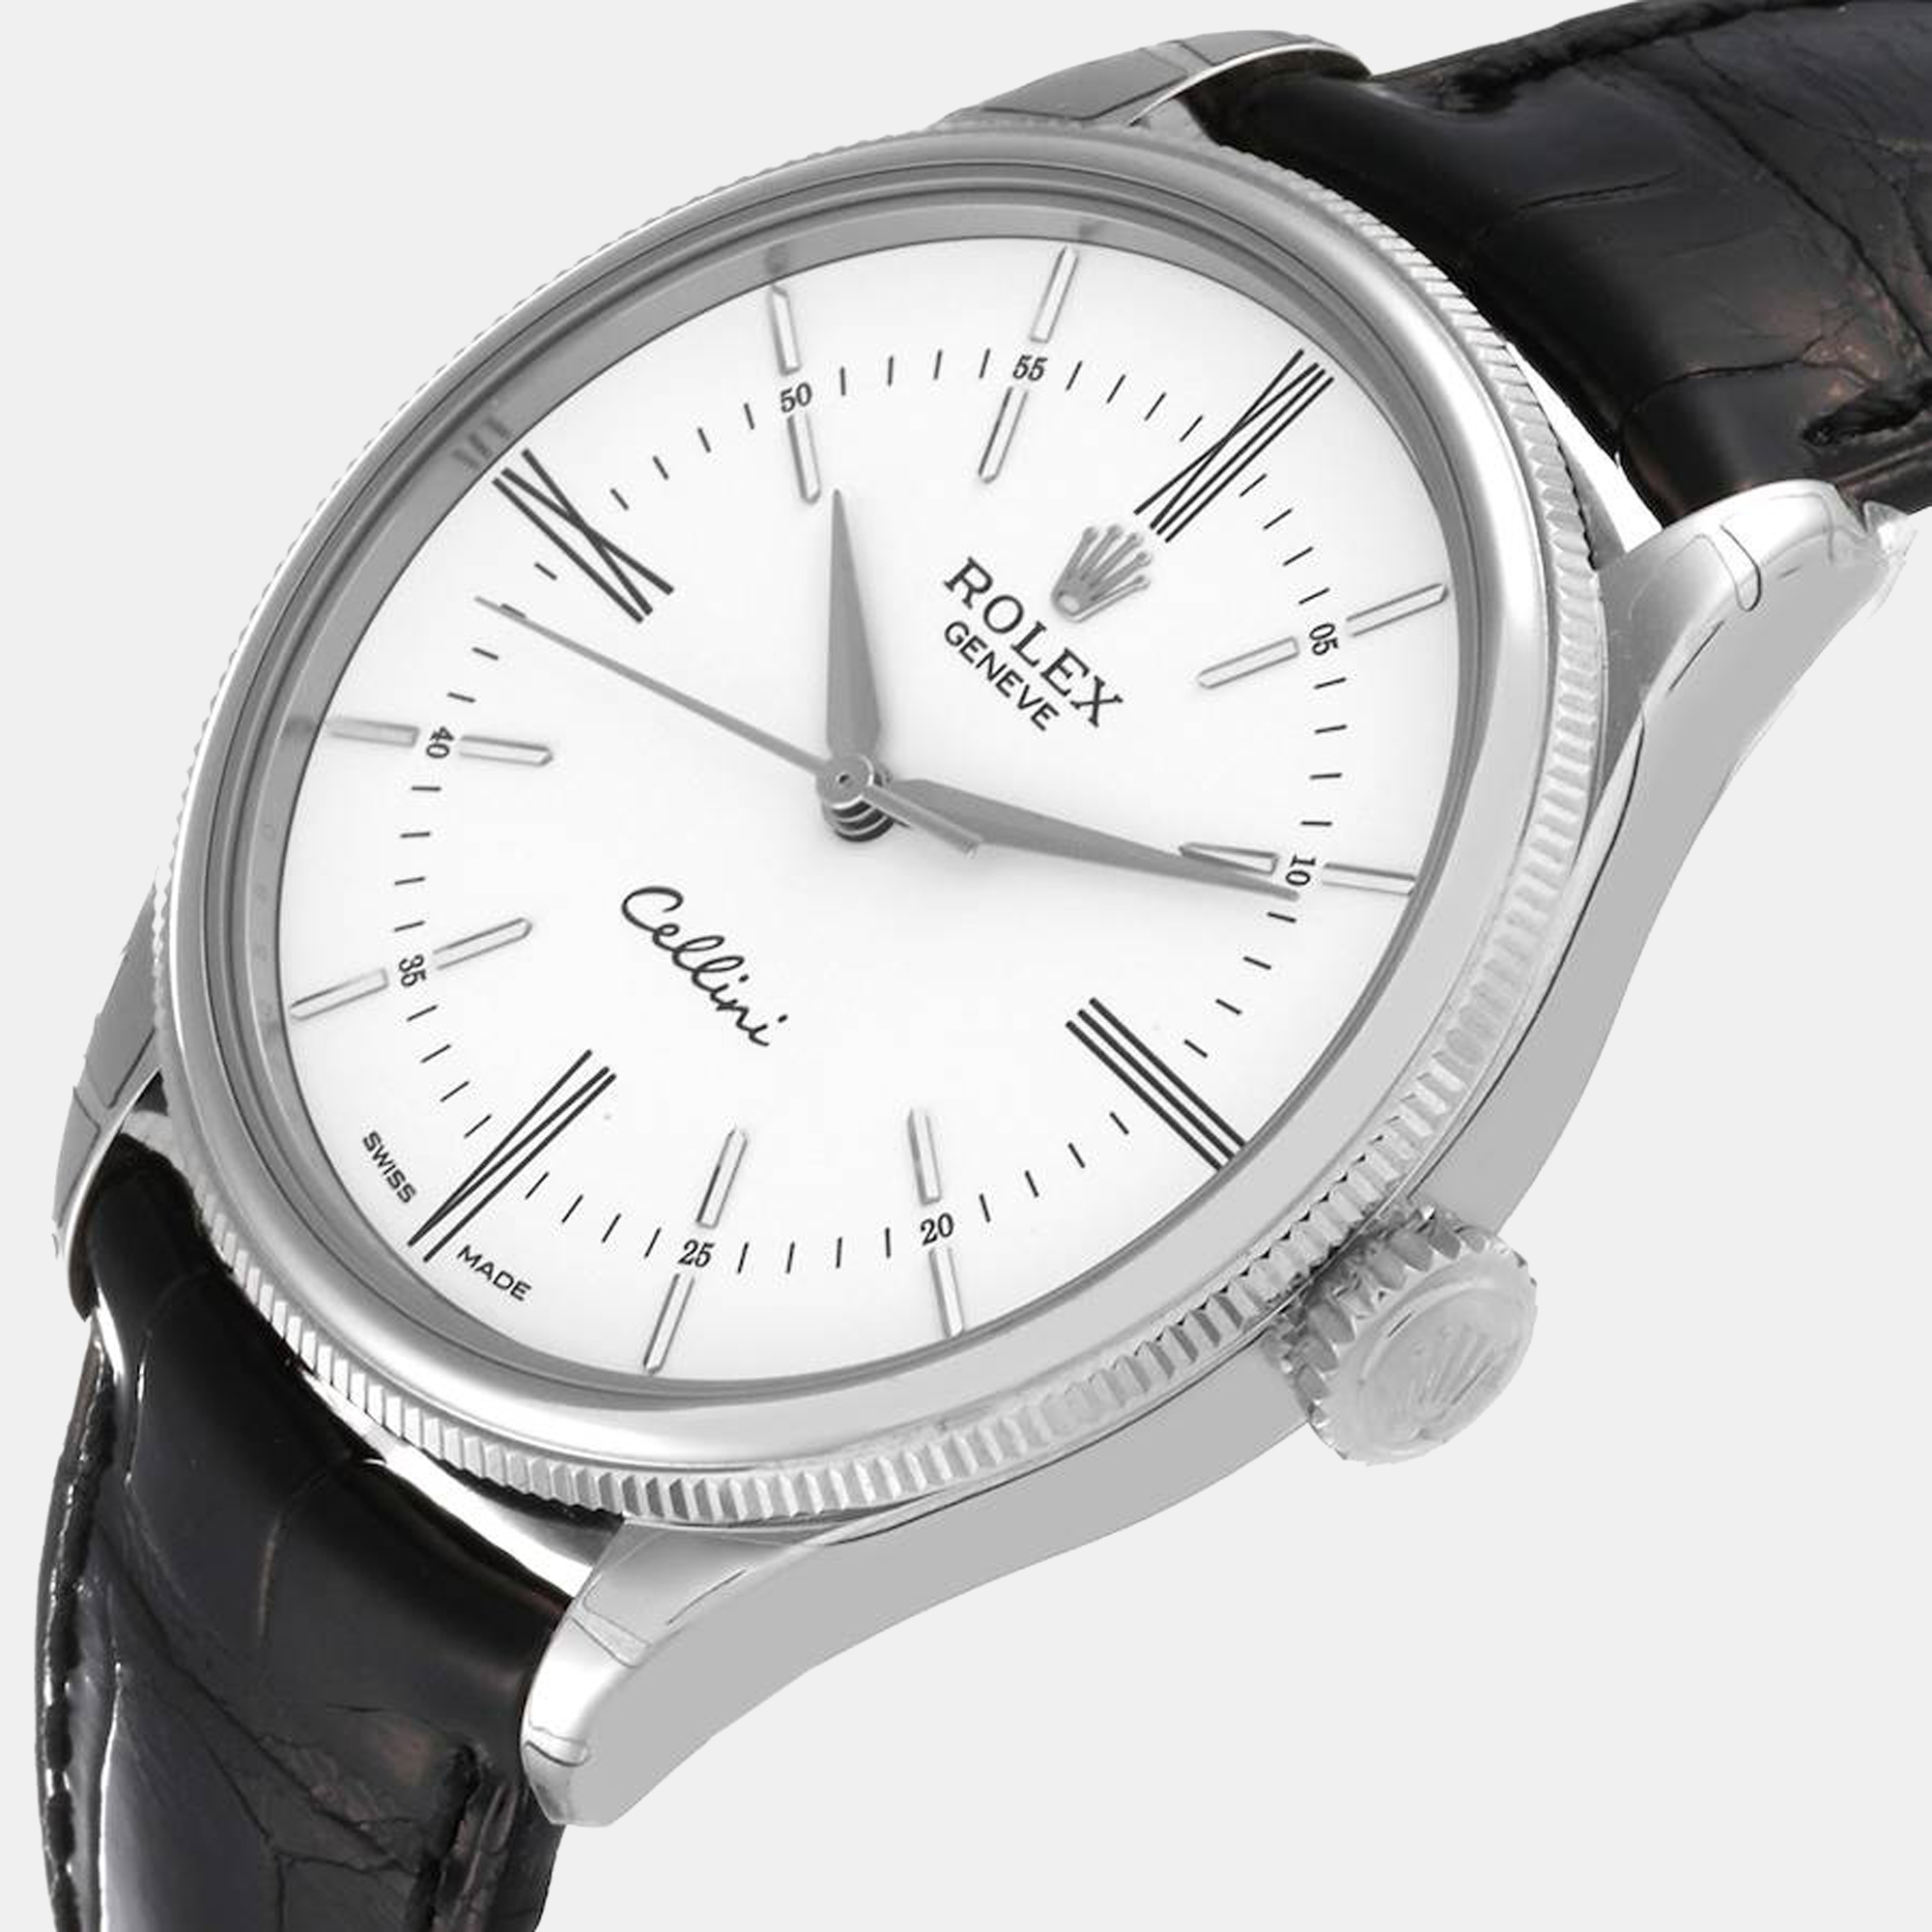 

Rolex Cellini Time White Gold Dial Automatic Men's Watch 50509